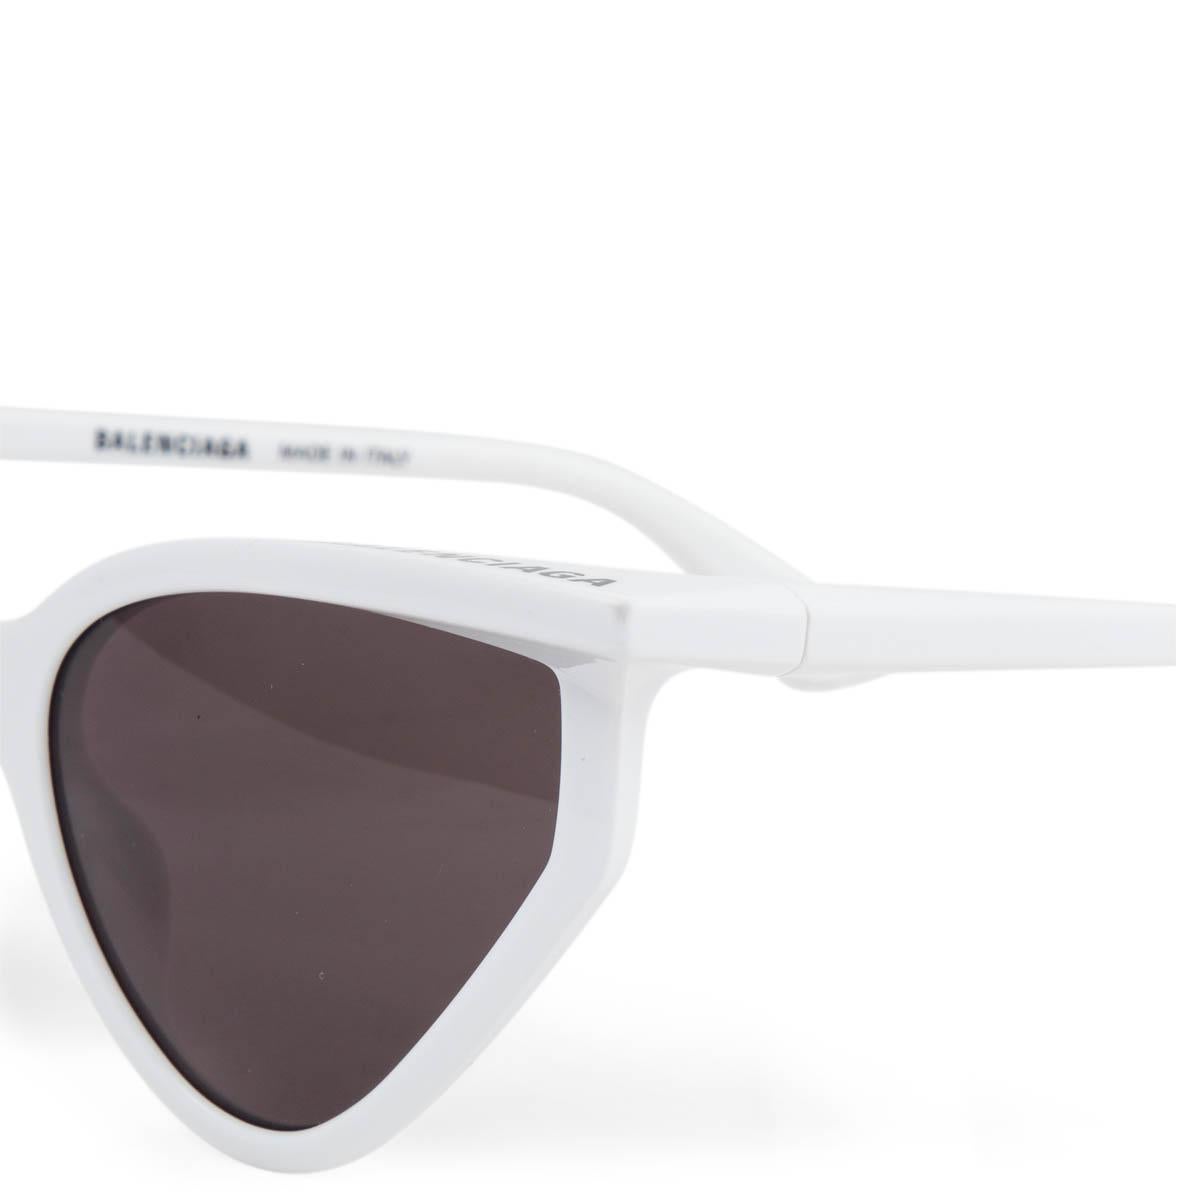 100% authentic Balenciaga BB0101S cat-eye sunglasses in white acetate and grey lenses. Have been worn and are in excellent condition. Come with case. 

Measurements
Model	BB0101S
Width	15.4cm (6in)
Height	5.3cm (2.1in)

All our listings include only